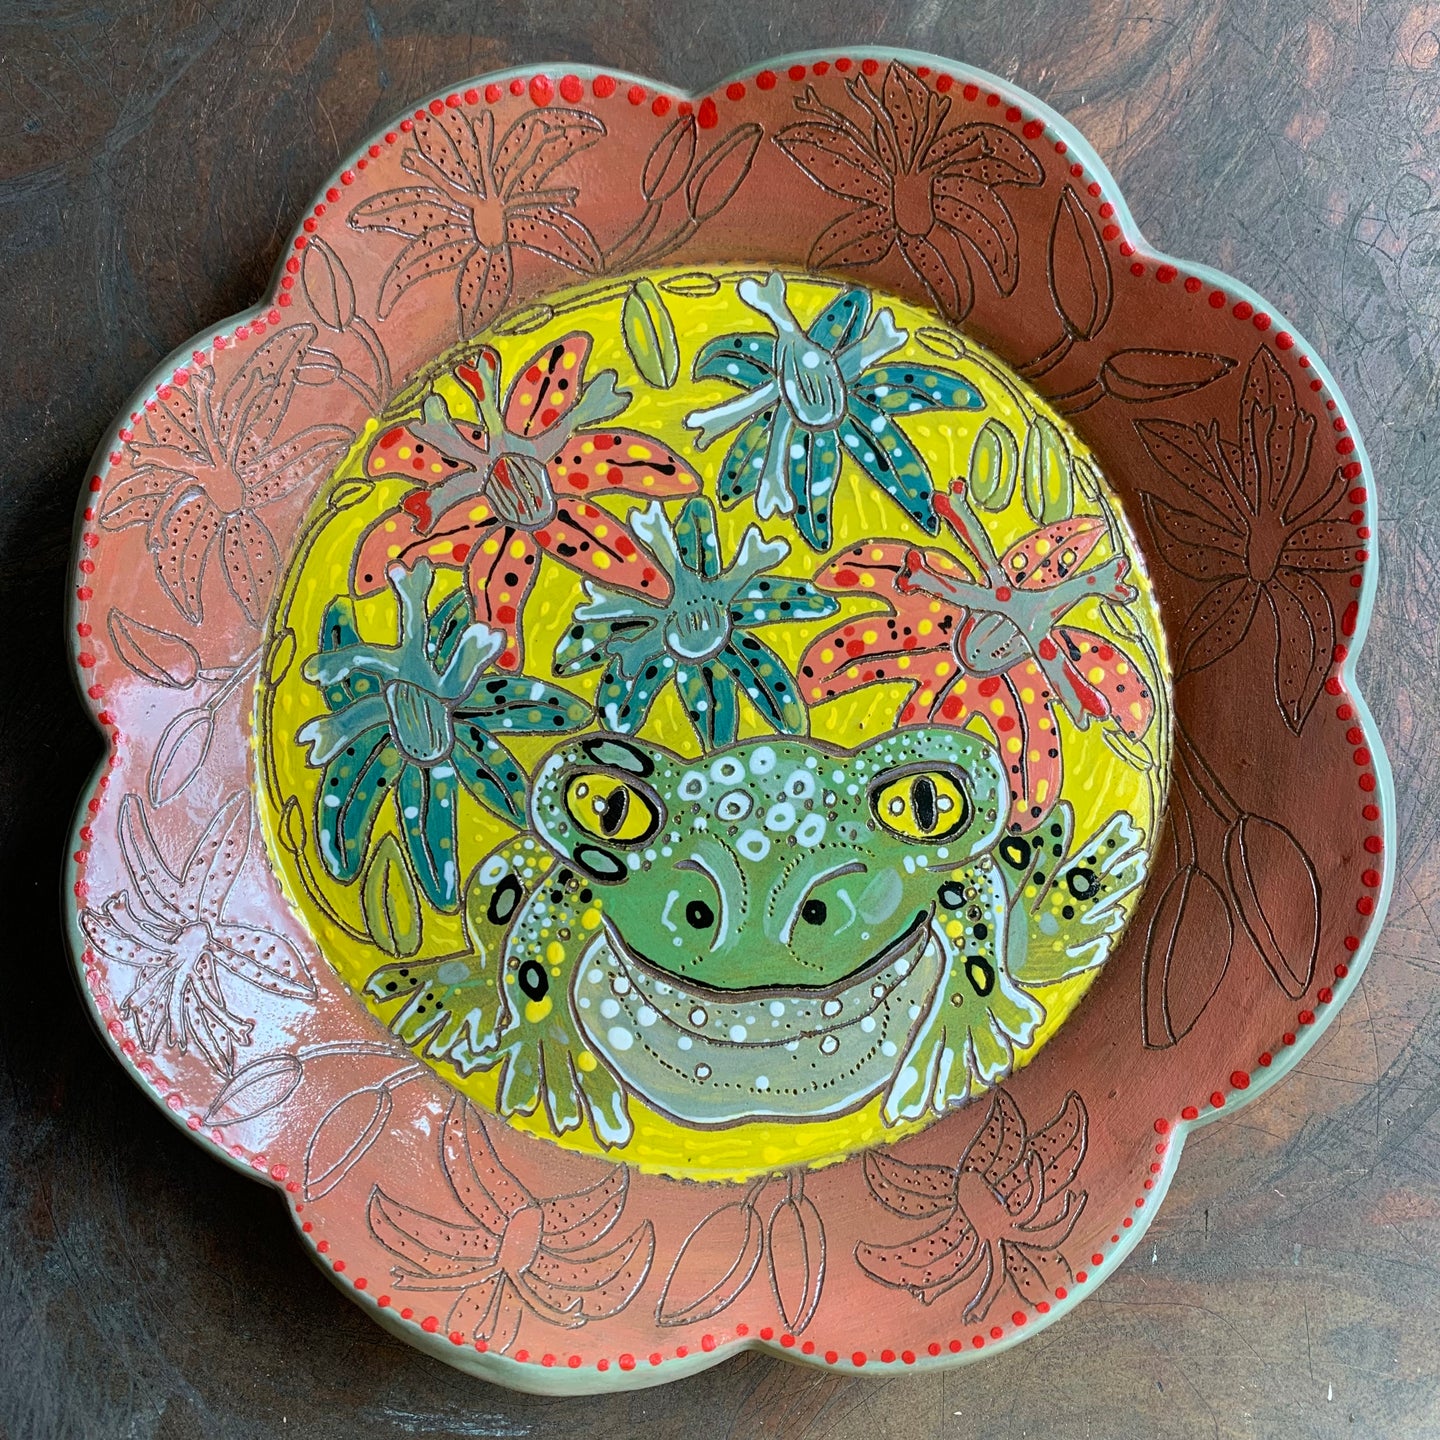 Toad and toad lily plate ish bowl ish